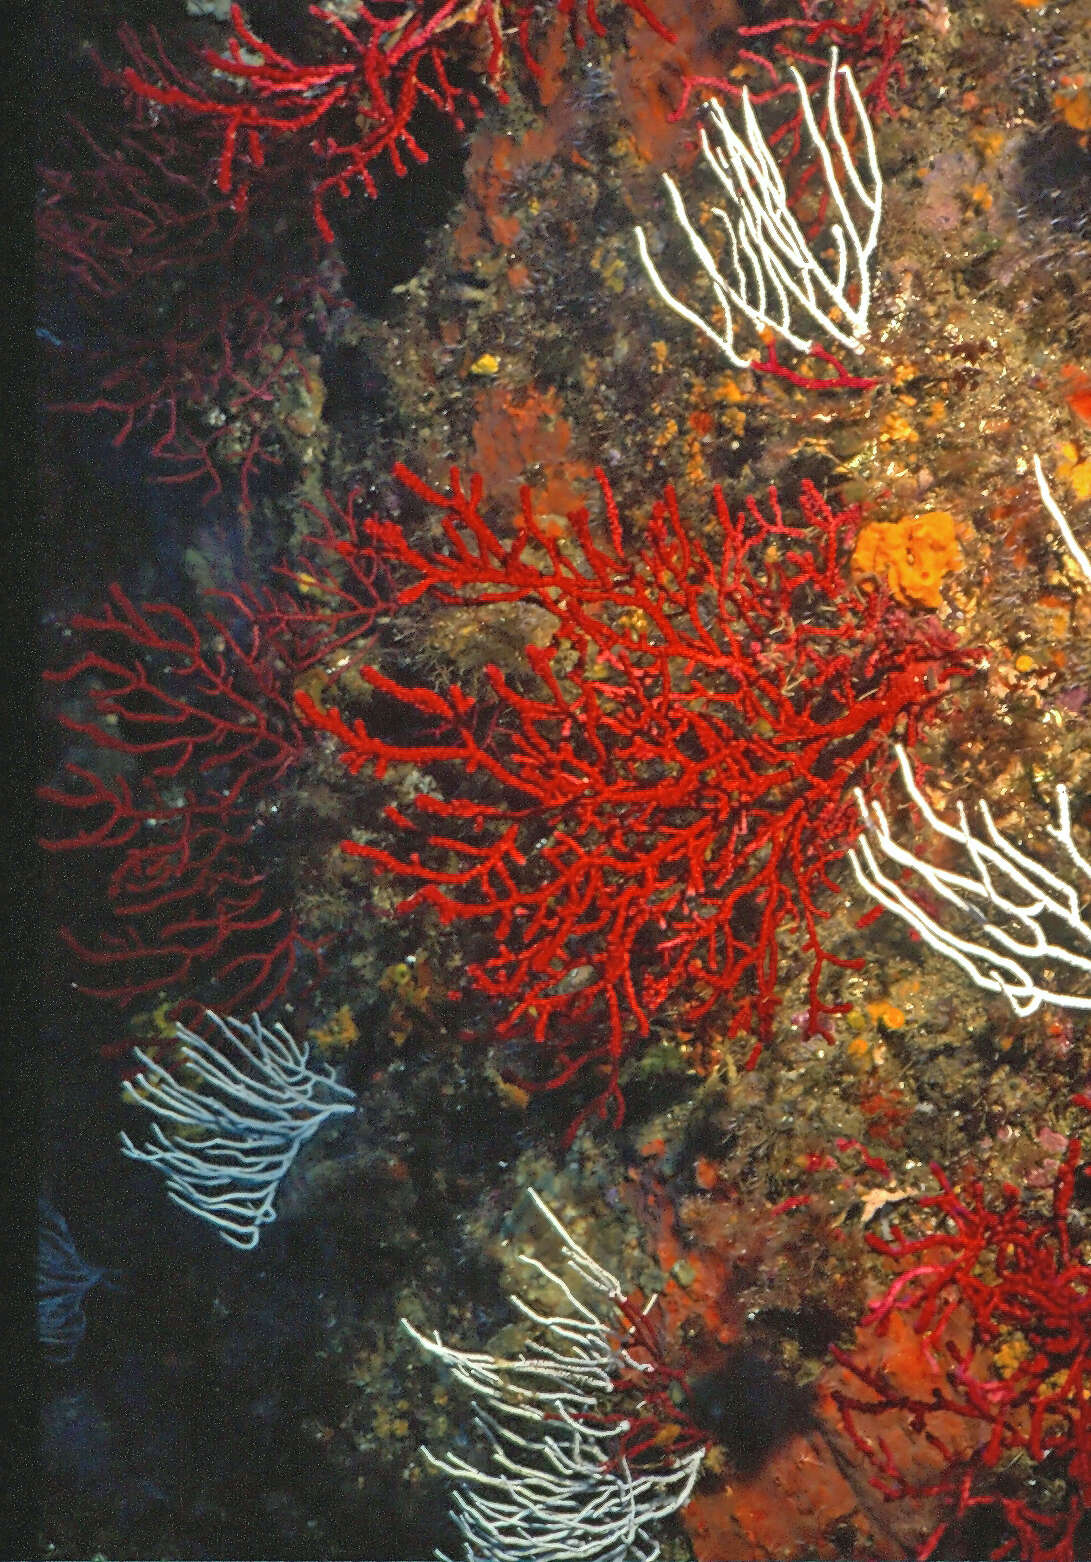 Image of white horny coral